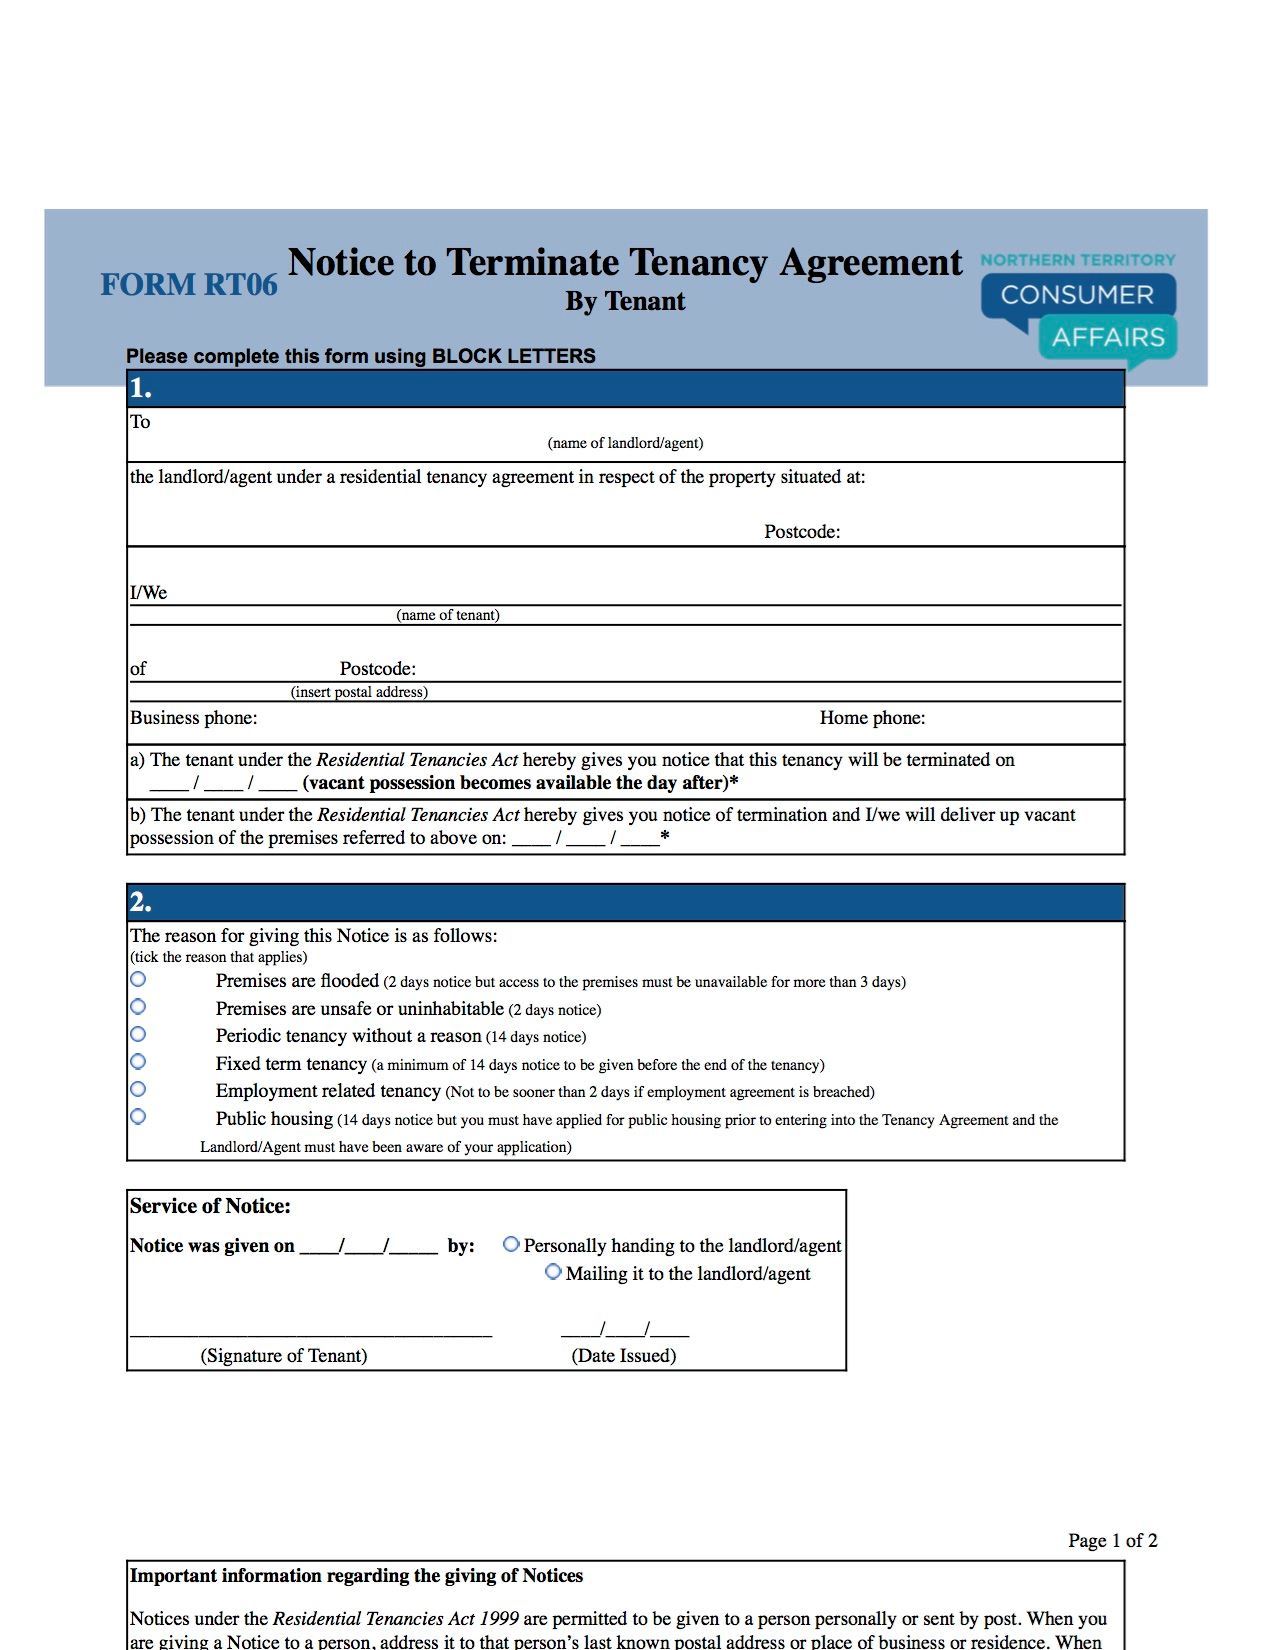 Northern Territory Notice of Termination by Tenant | Legal Forms and ...